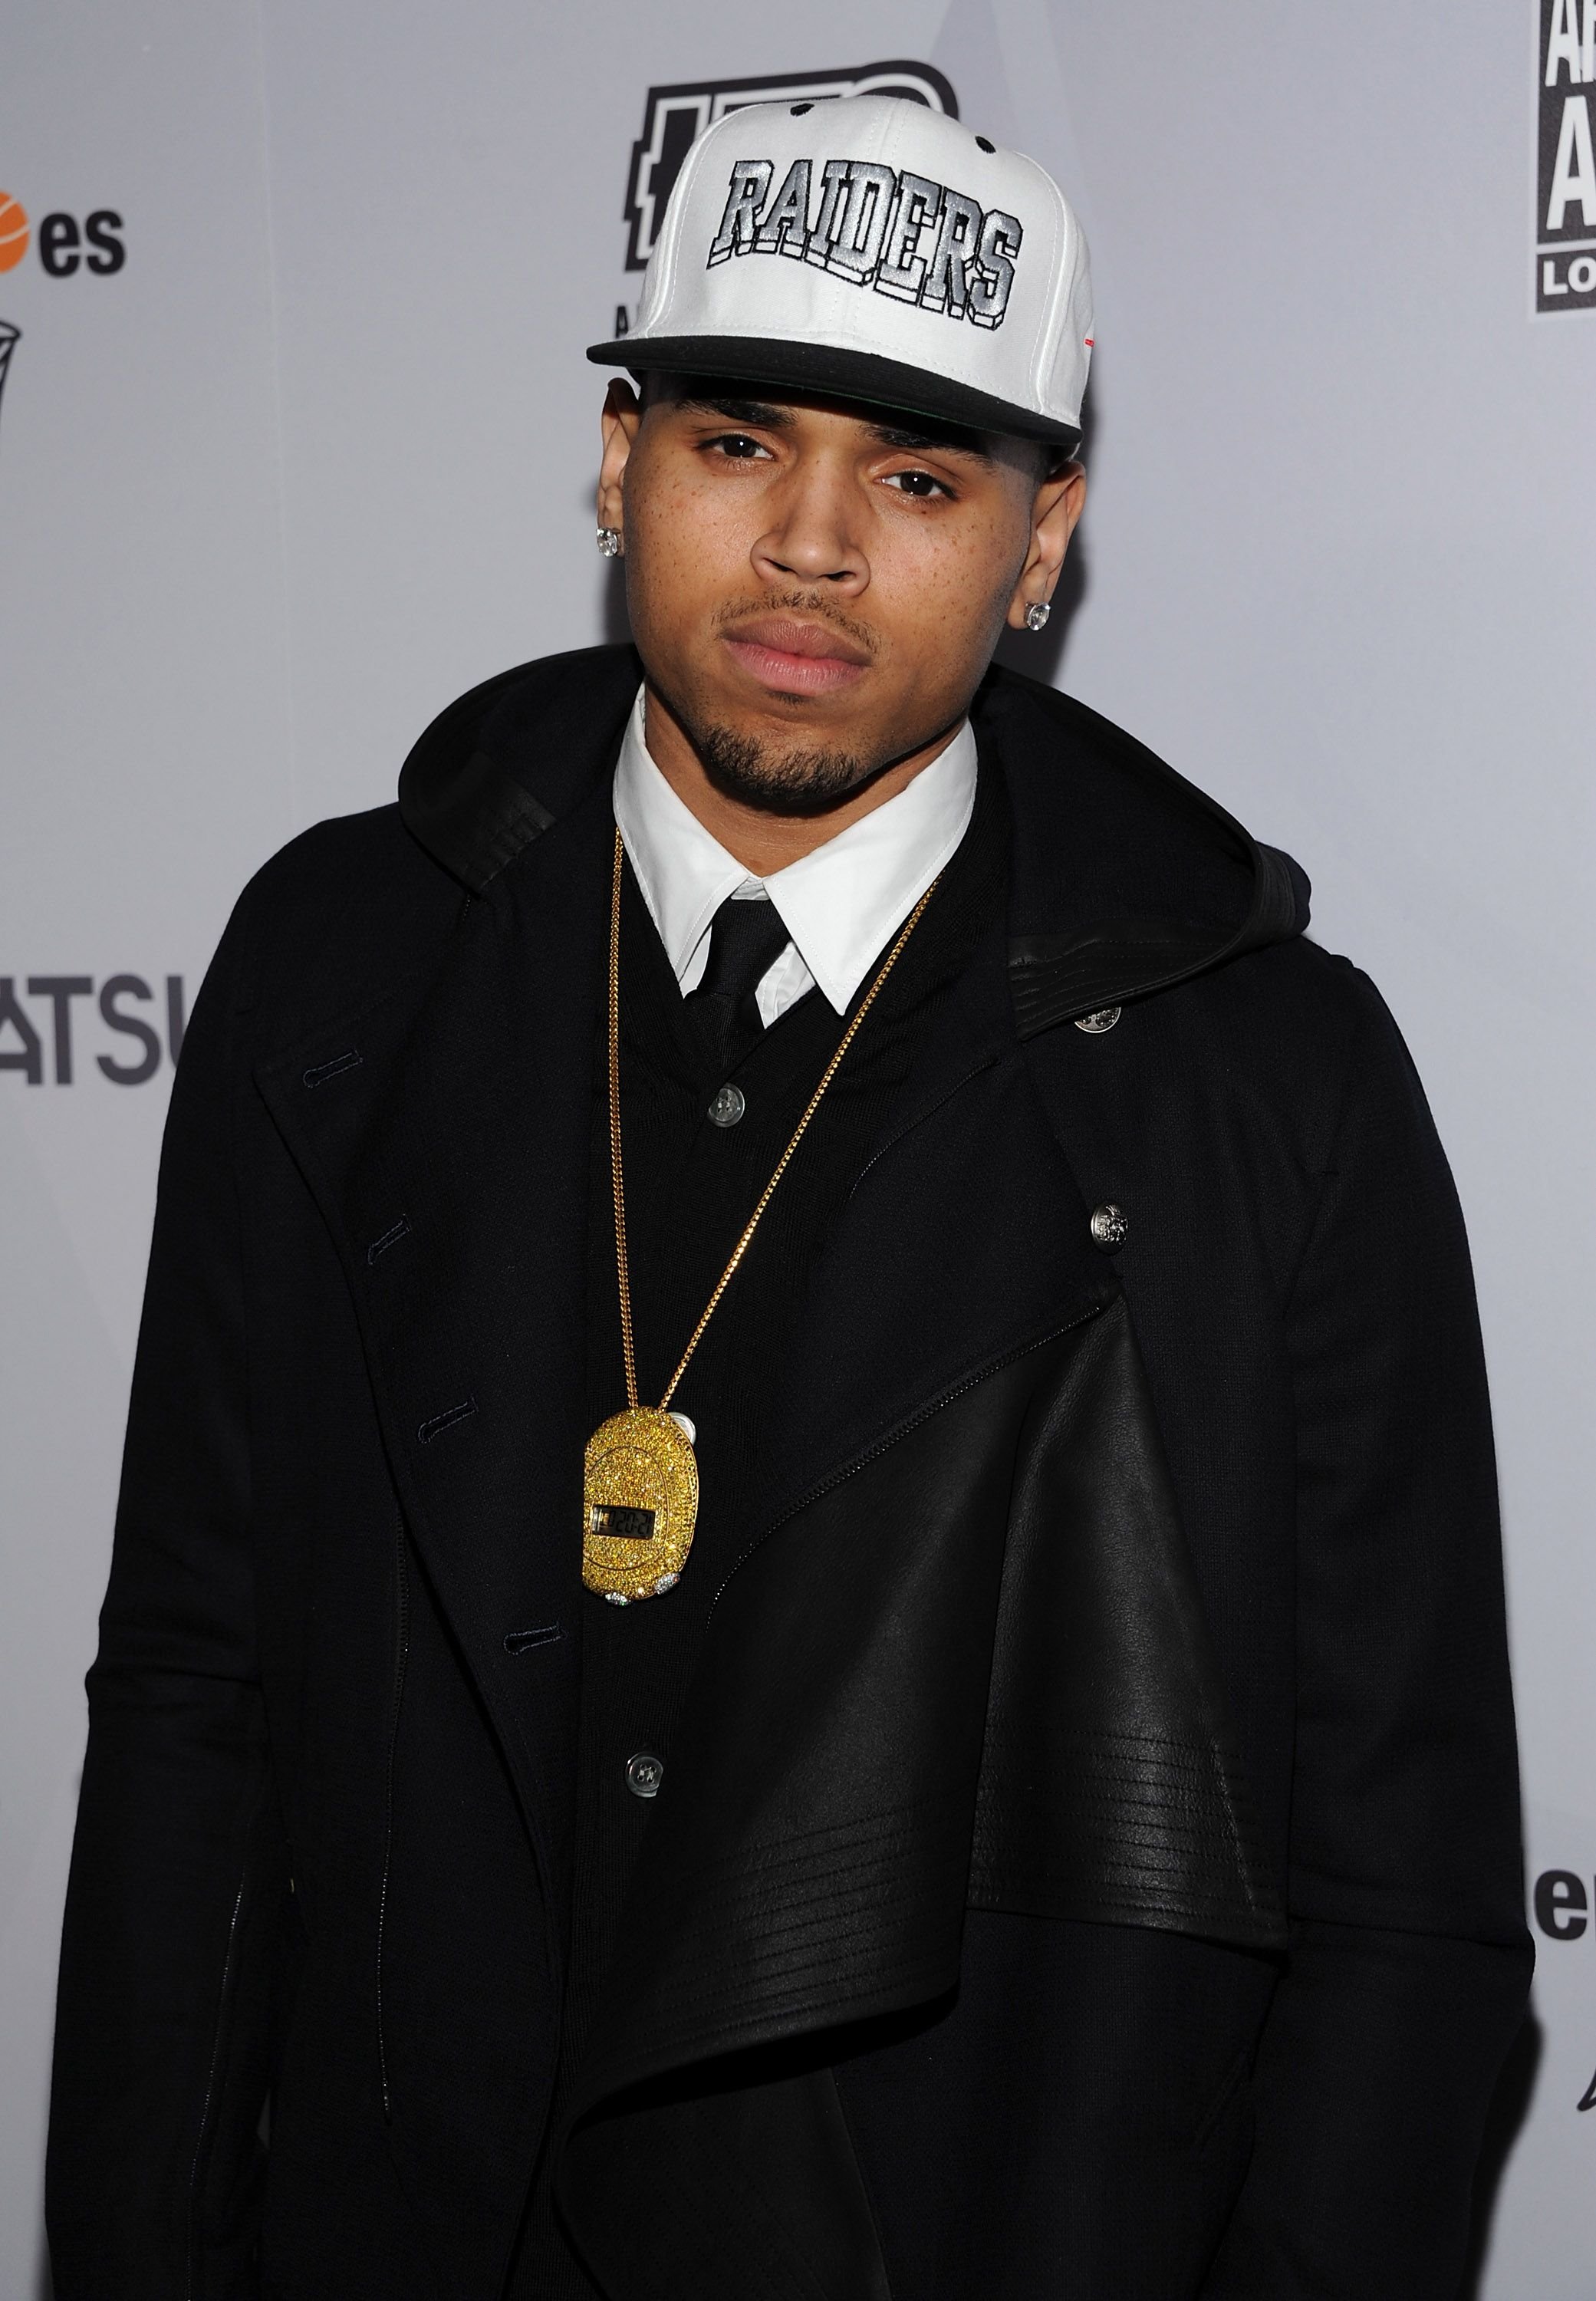 Chris Brown arrives at the After-School All Stars (ASAS) Hoop Heroes Salute launch party at Katsuya on February 18, 2011. | Photo: Getty Images